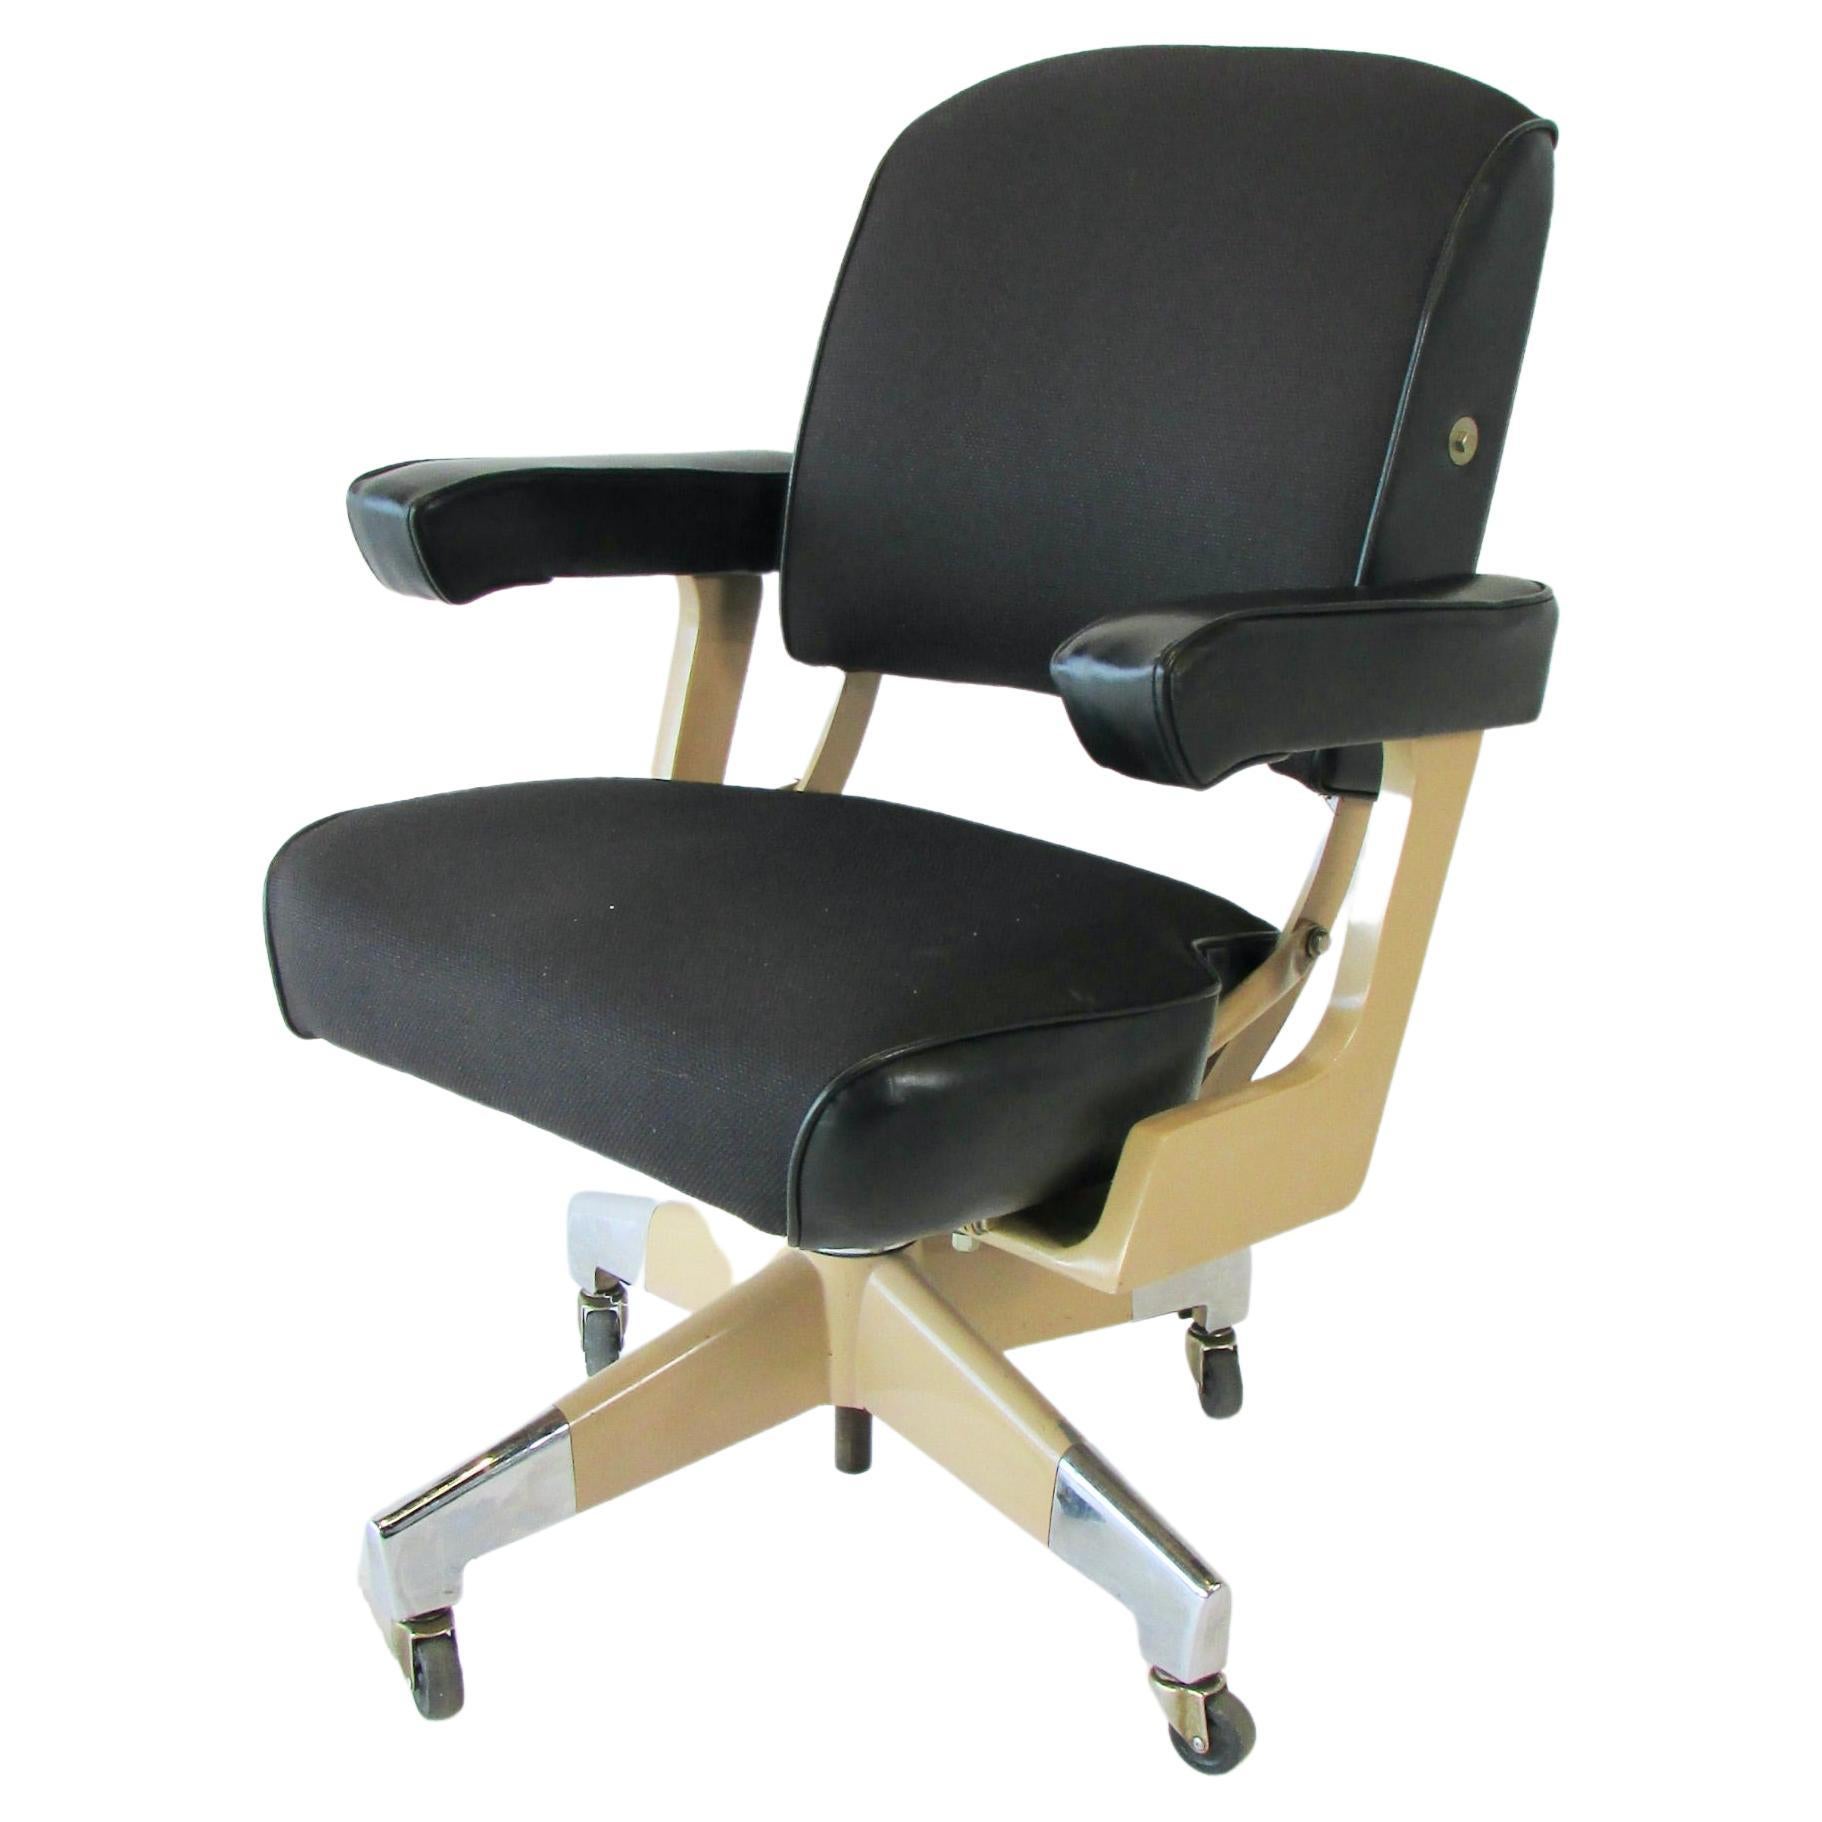 Domore Co. Executive Multi Adjustable Industrial Swivel Desk Chair on Casters